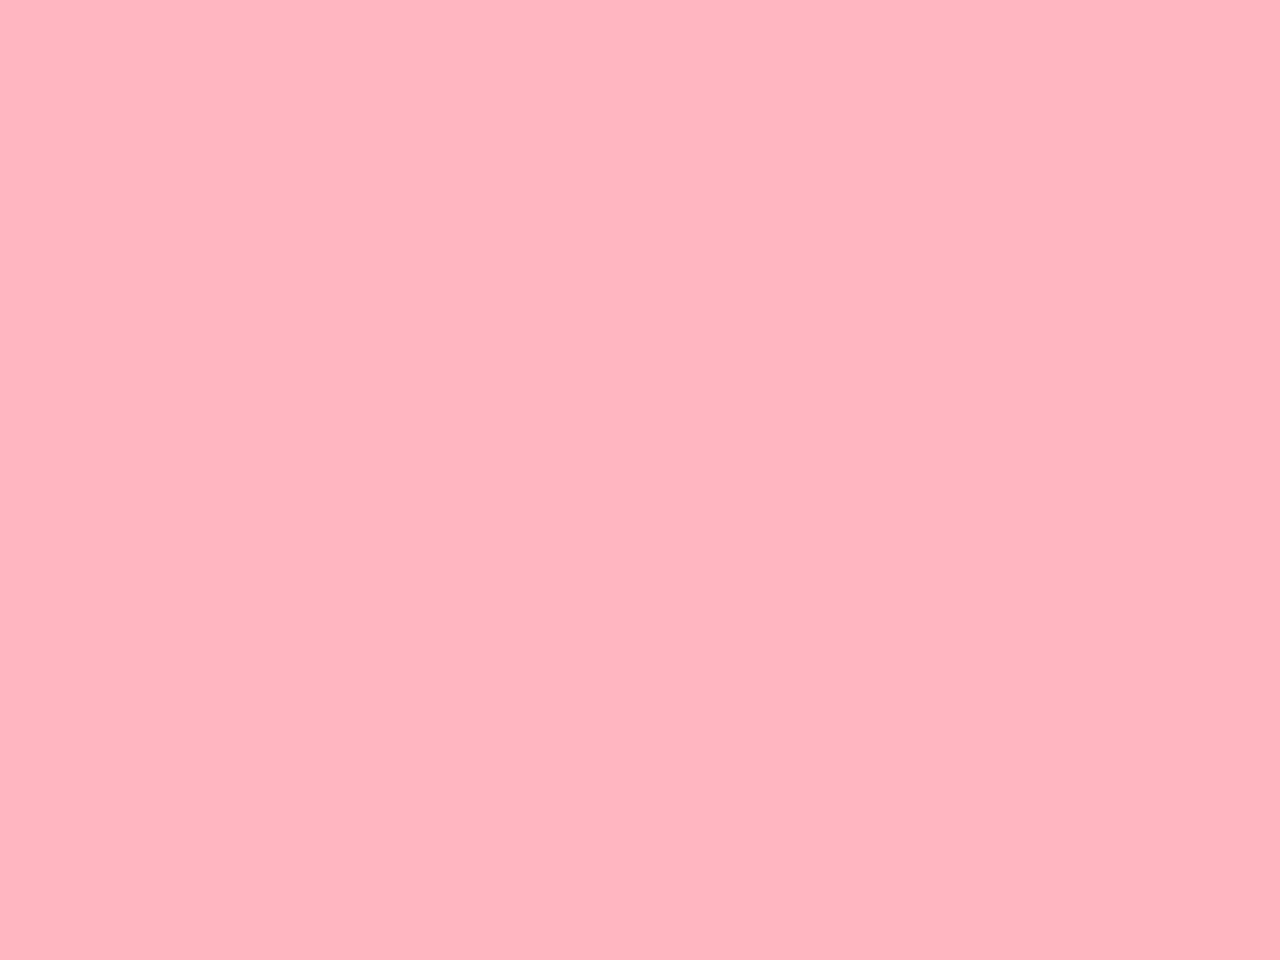 Free 1280x960 resolution Light Pink solid color background view and